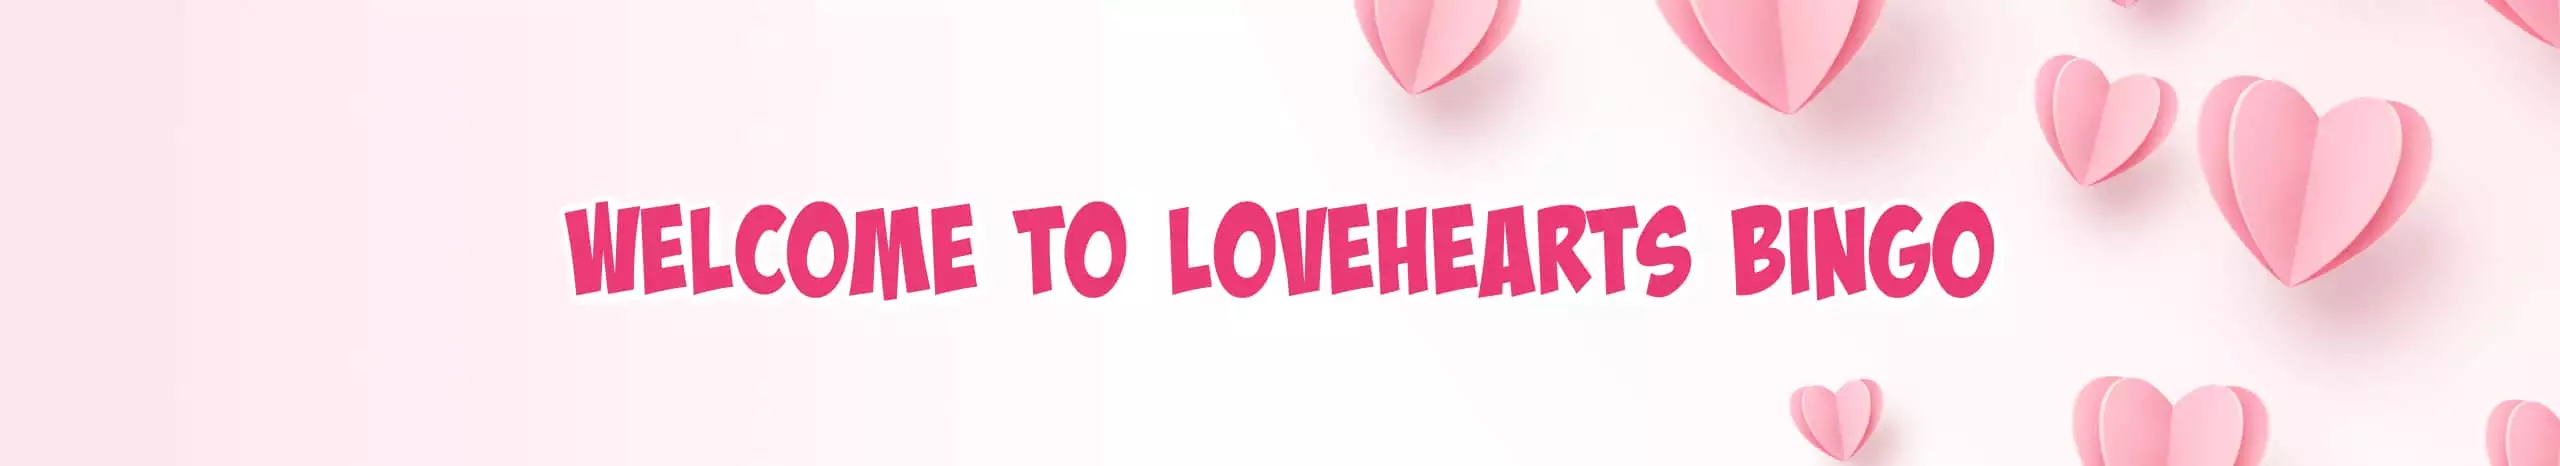 Love Hearts Bingo offers players entertaining bingo & online slot promotions on a weekly & monthly basis. Get more details here!